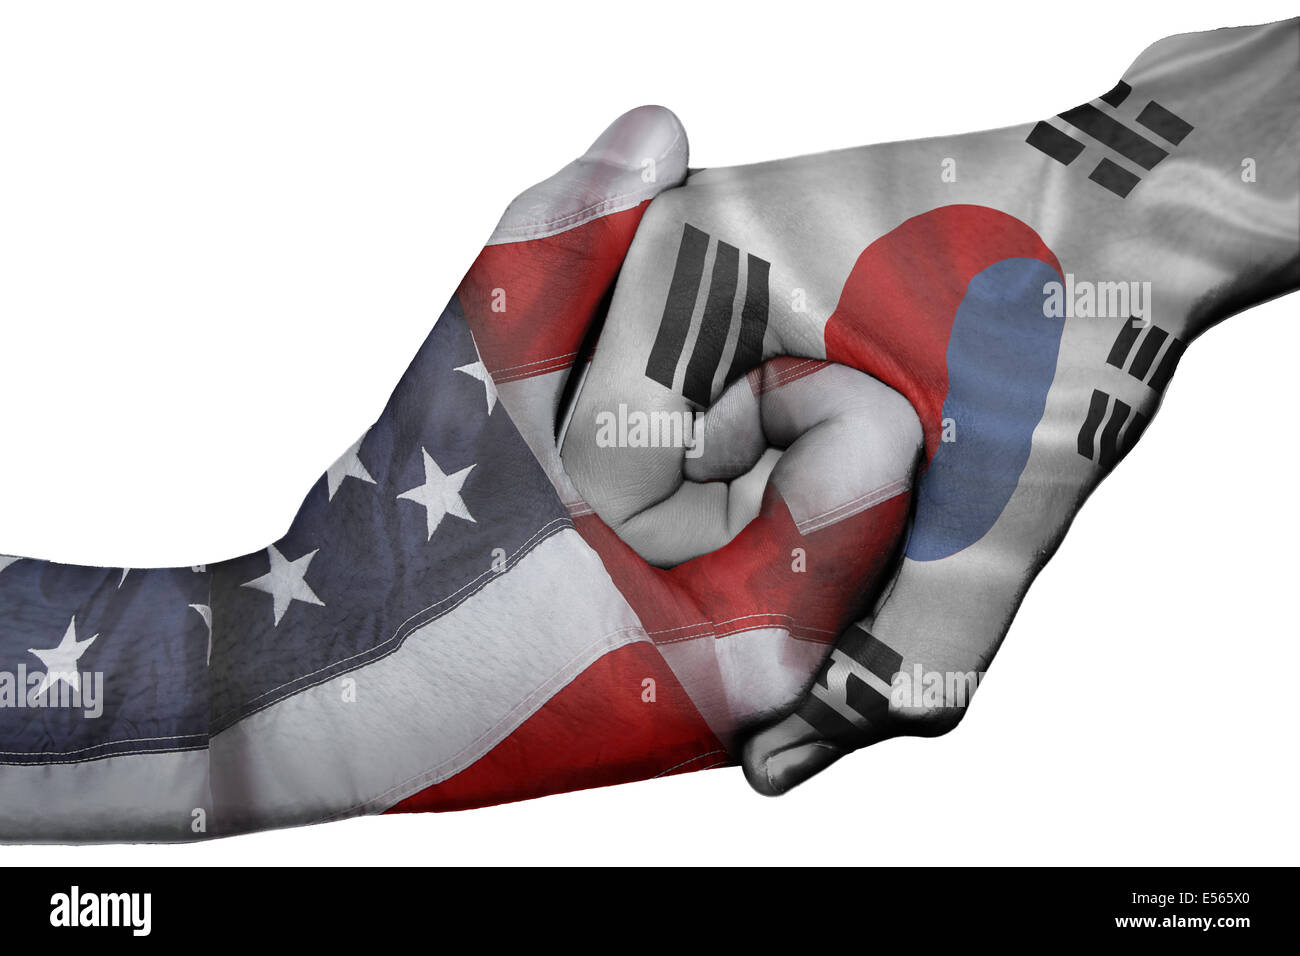 Diplomatic handshake between countries: flags of United States and South Korea overprinted the two hands Stock Photo